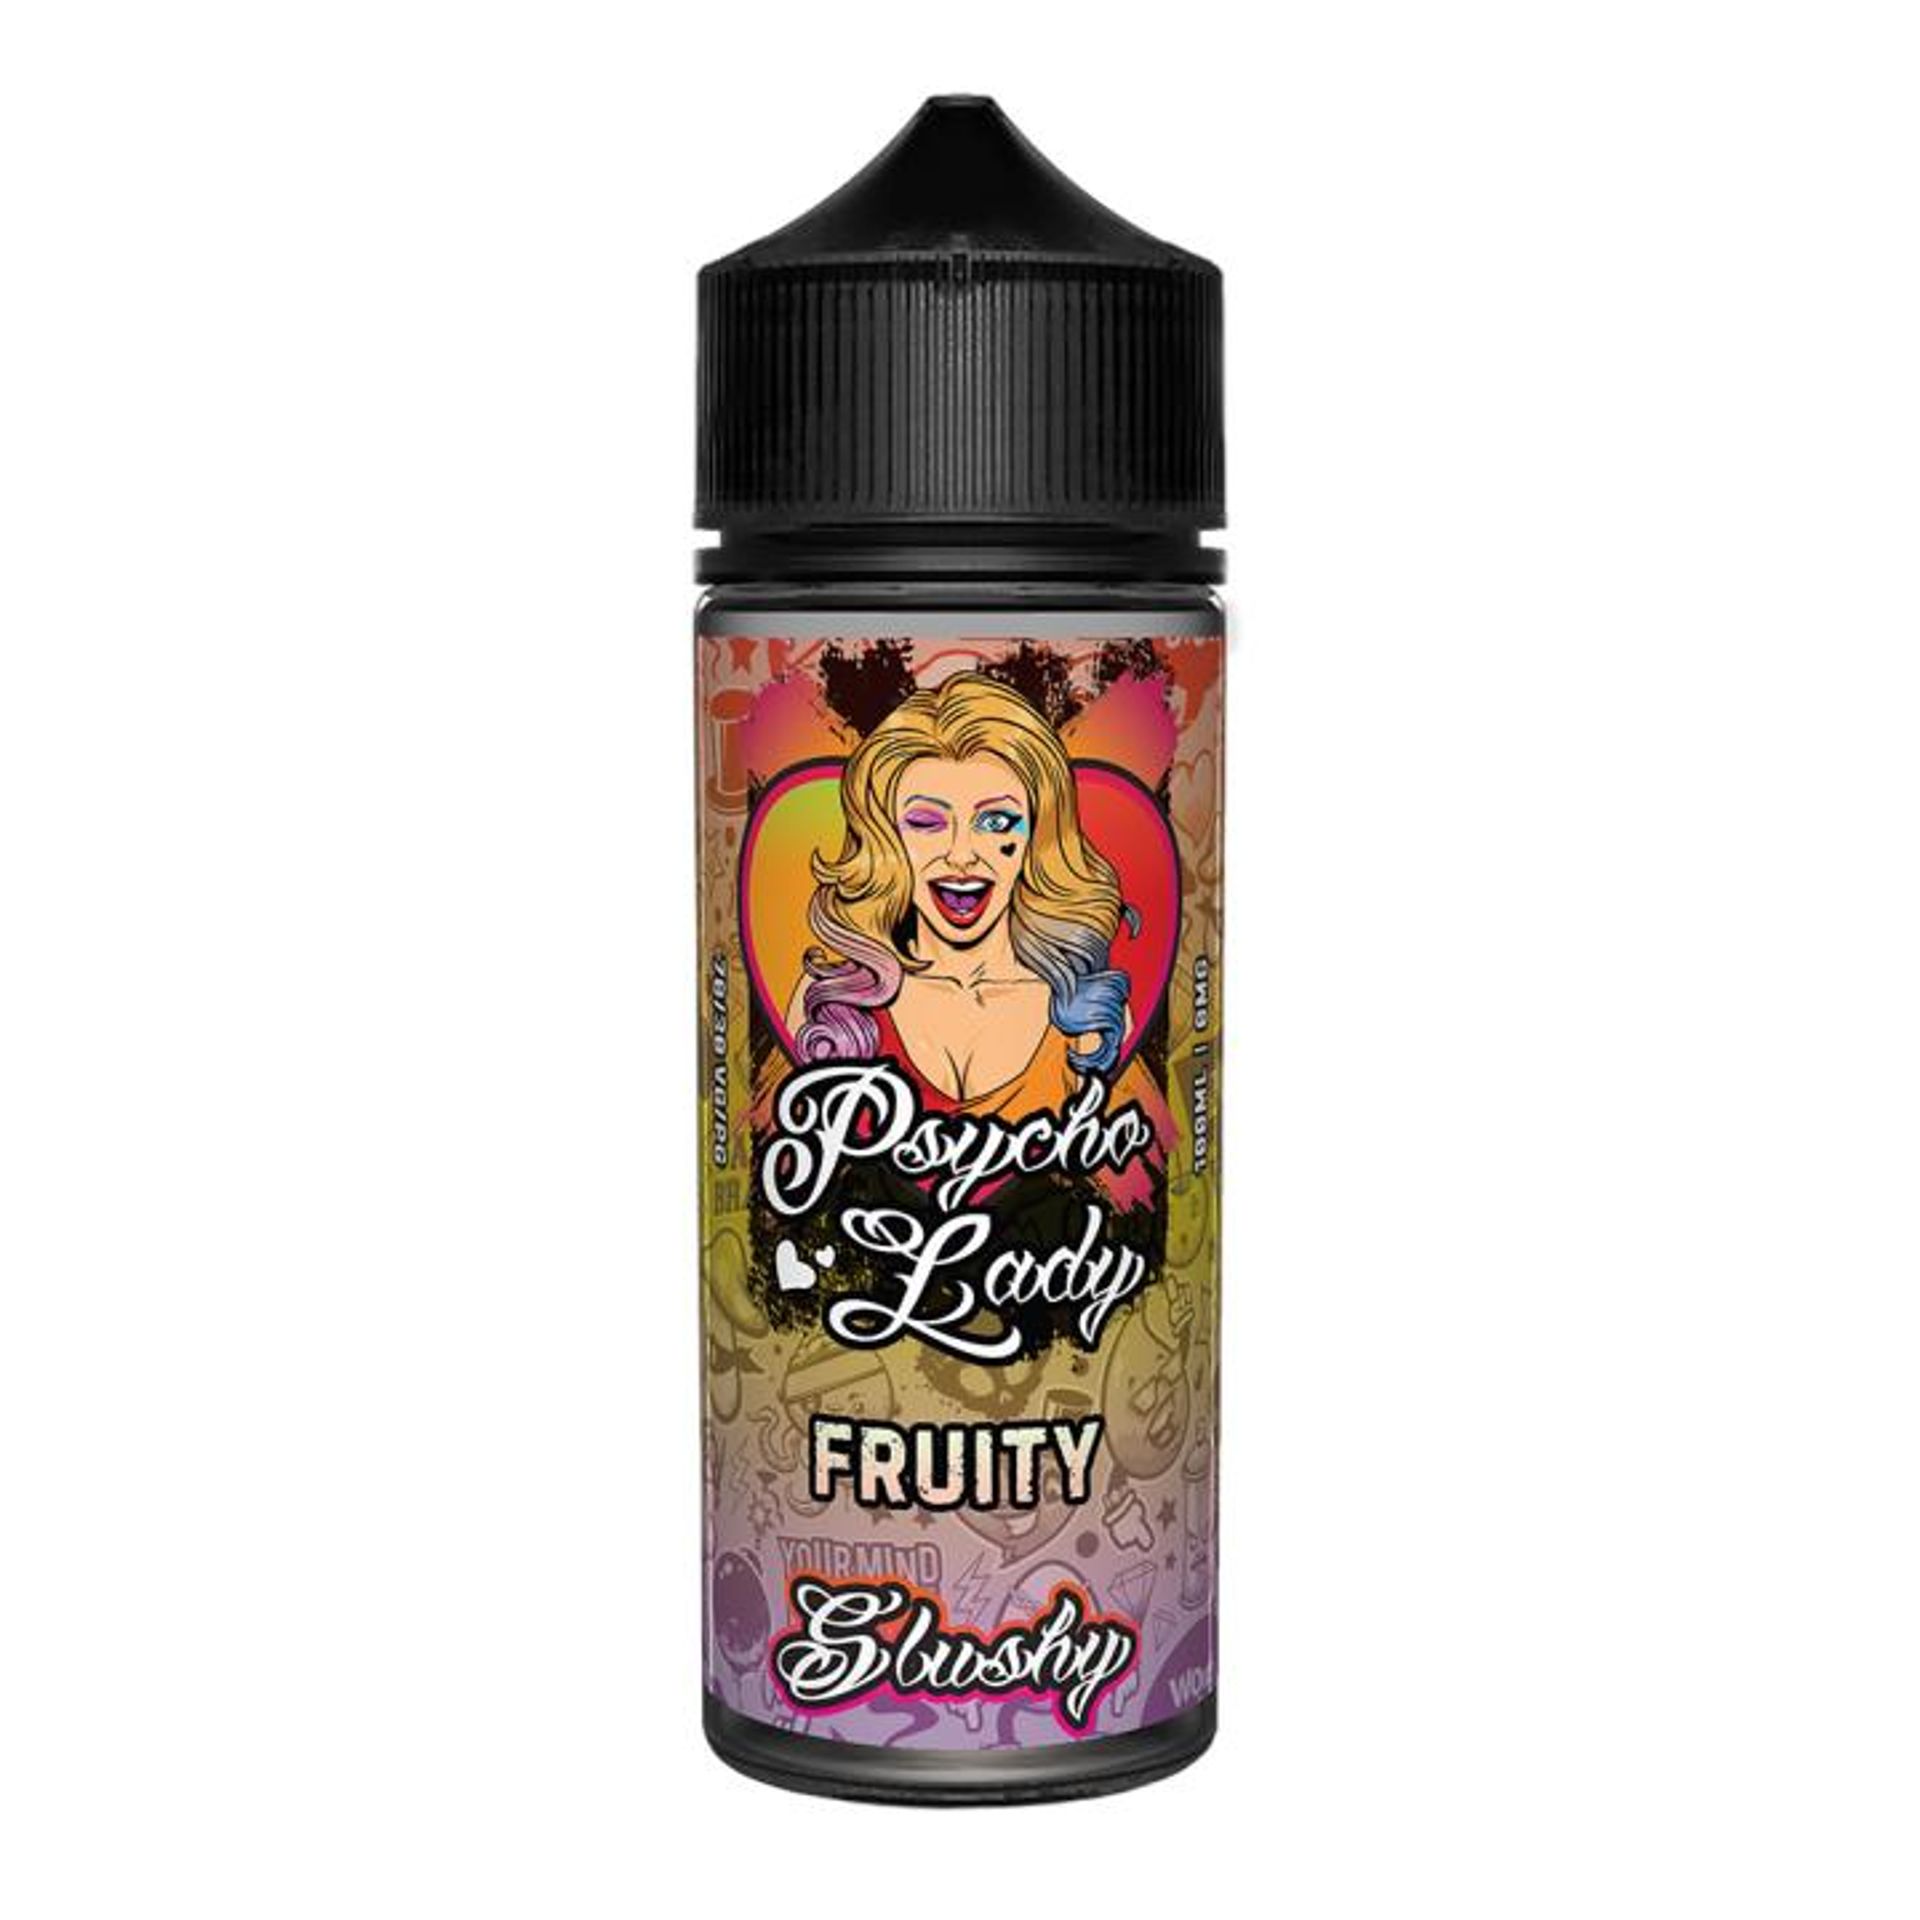 Image of Fruity by Psycho Lady